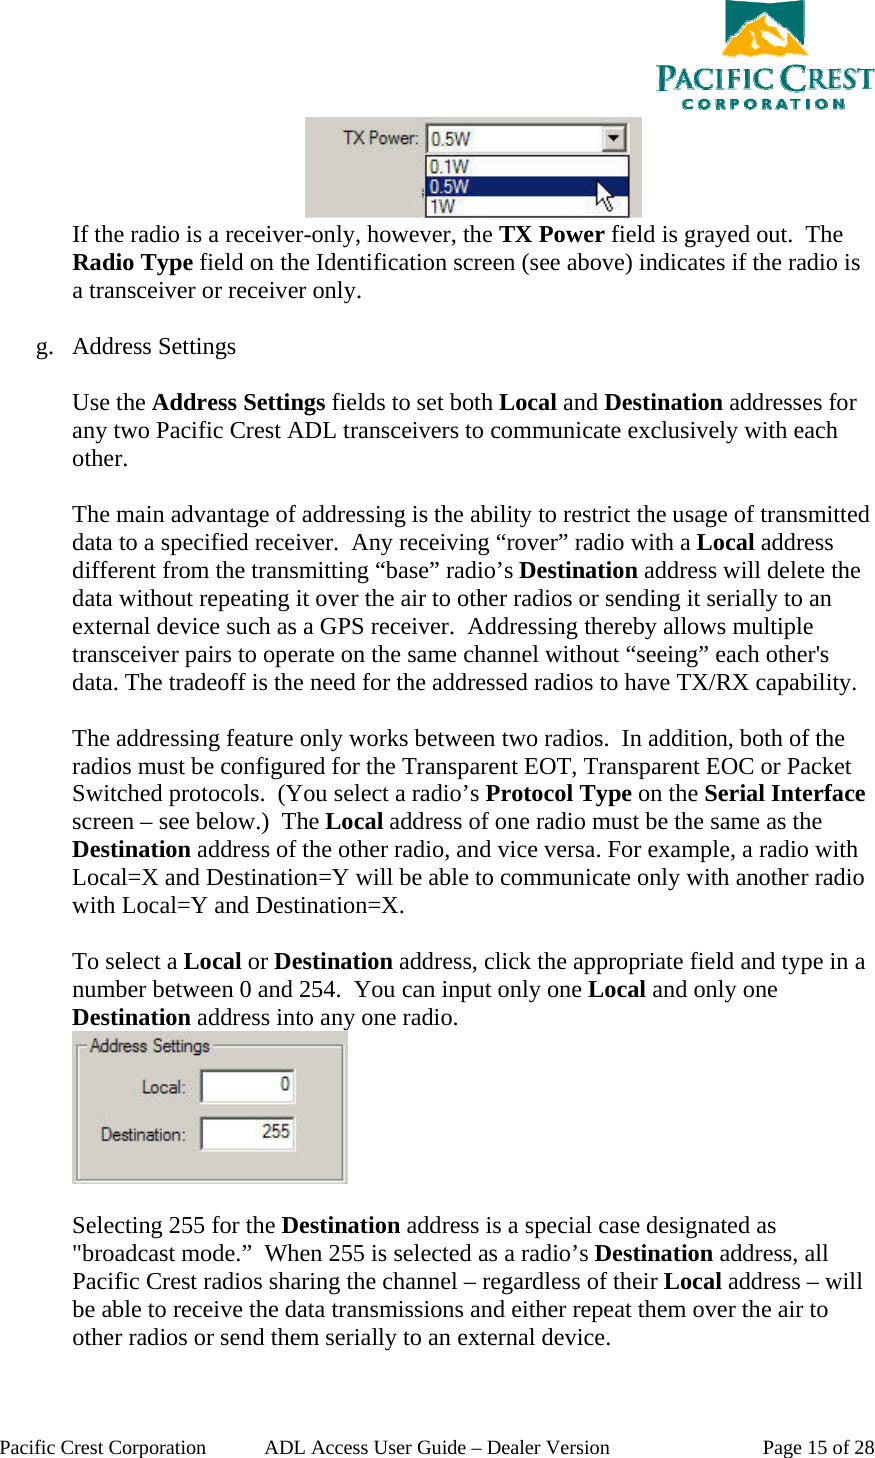  Pacific Crest Corporation  ADL Access User Guide – Dealer Version  Page 15 of 28  If the radio is a receiver-only, however, the TX Power field is grayed out.  The Radio Type field on the Identification screen (see above) indicates if the radio is a transceiver or receiver only.  g. Address Settings  Use the Address Settings fields to set both Local and Destination addresses for any two Pacific Crest ADL transceivers to communicate exclusively with each other.  The main advantage of addressing is the ability to restrict the usage of transmitted data to a specified receiver.  Any receiving “rover” radio with a Local address different from the transmitting “base” radio’s Destination address will delete the data without repeating it over the air to other radios or sending it serially to an external device such as a GPS receiver.  Addressing thereby allows multiple transceiver pairs to operate on the same channel without “seeing” each other&apos;s data. The tradeoff is the need for the addressed radios to have TX/RX capability.  The addressing feature only works between two radios.  In addition, both of the radios must be configured for the Transparent EOT, Transparent EOC or Packet Switched protocols.  (You select a radio’s Protocol Type on the Serial Interface screen – see below.)  The Local address of one radio must be the same as the Destination address of the other radio, and vice versa. For example, a radio with Local=X and Destination=Y will be able to communicate only with another radio with Local=Y and Destination=X.  To select a Local or Destination address, click the appropriate field and type in a number between 0 and 254.  You can input only one Local and only one Destination address into any one radio.   Selecting 255 for the Destination address is a special case designated as &quot;broadcast mode.”  When 255 is selected as a radio’s Destination address, all Pacific Crest radios sharing the channel – regardless of their Local address – will be able to receive the data transmissions and either repeat them over the air to other radios or send them serially to an external device.  